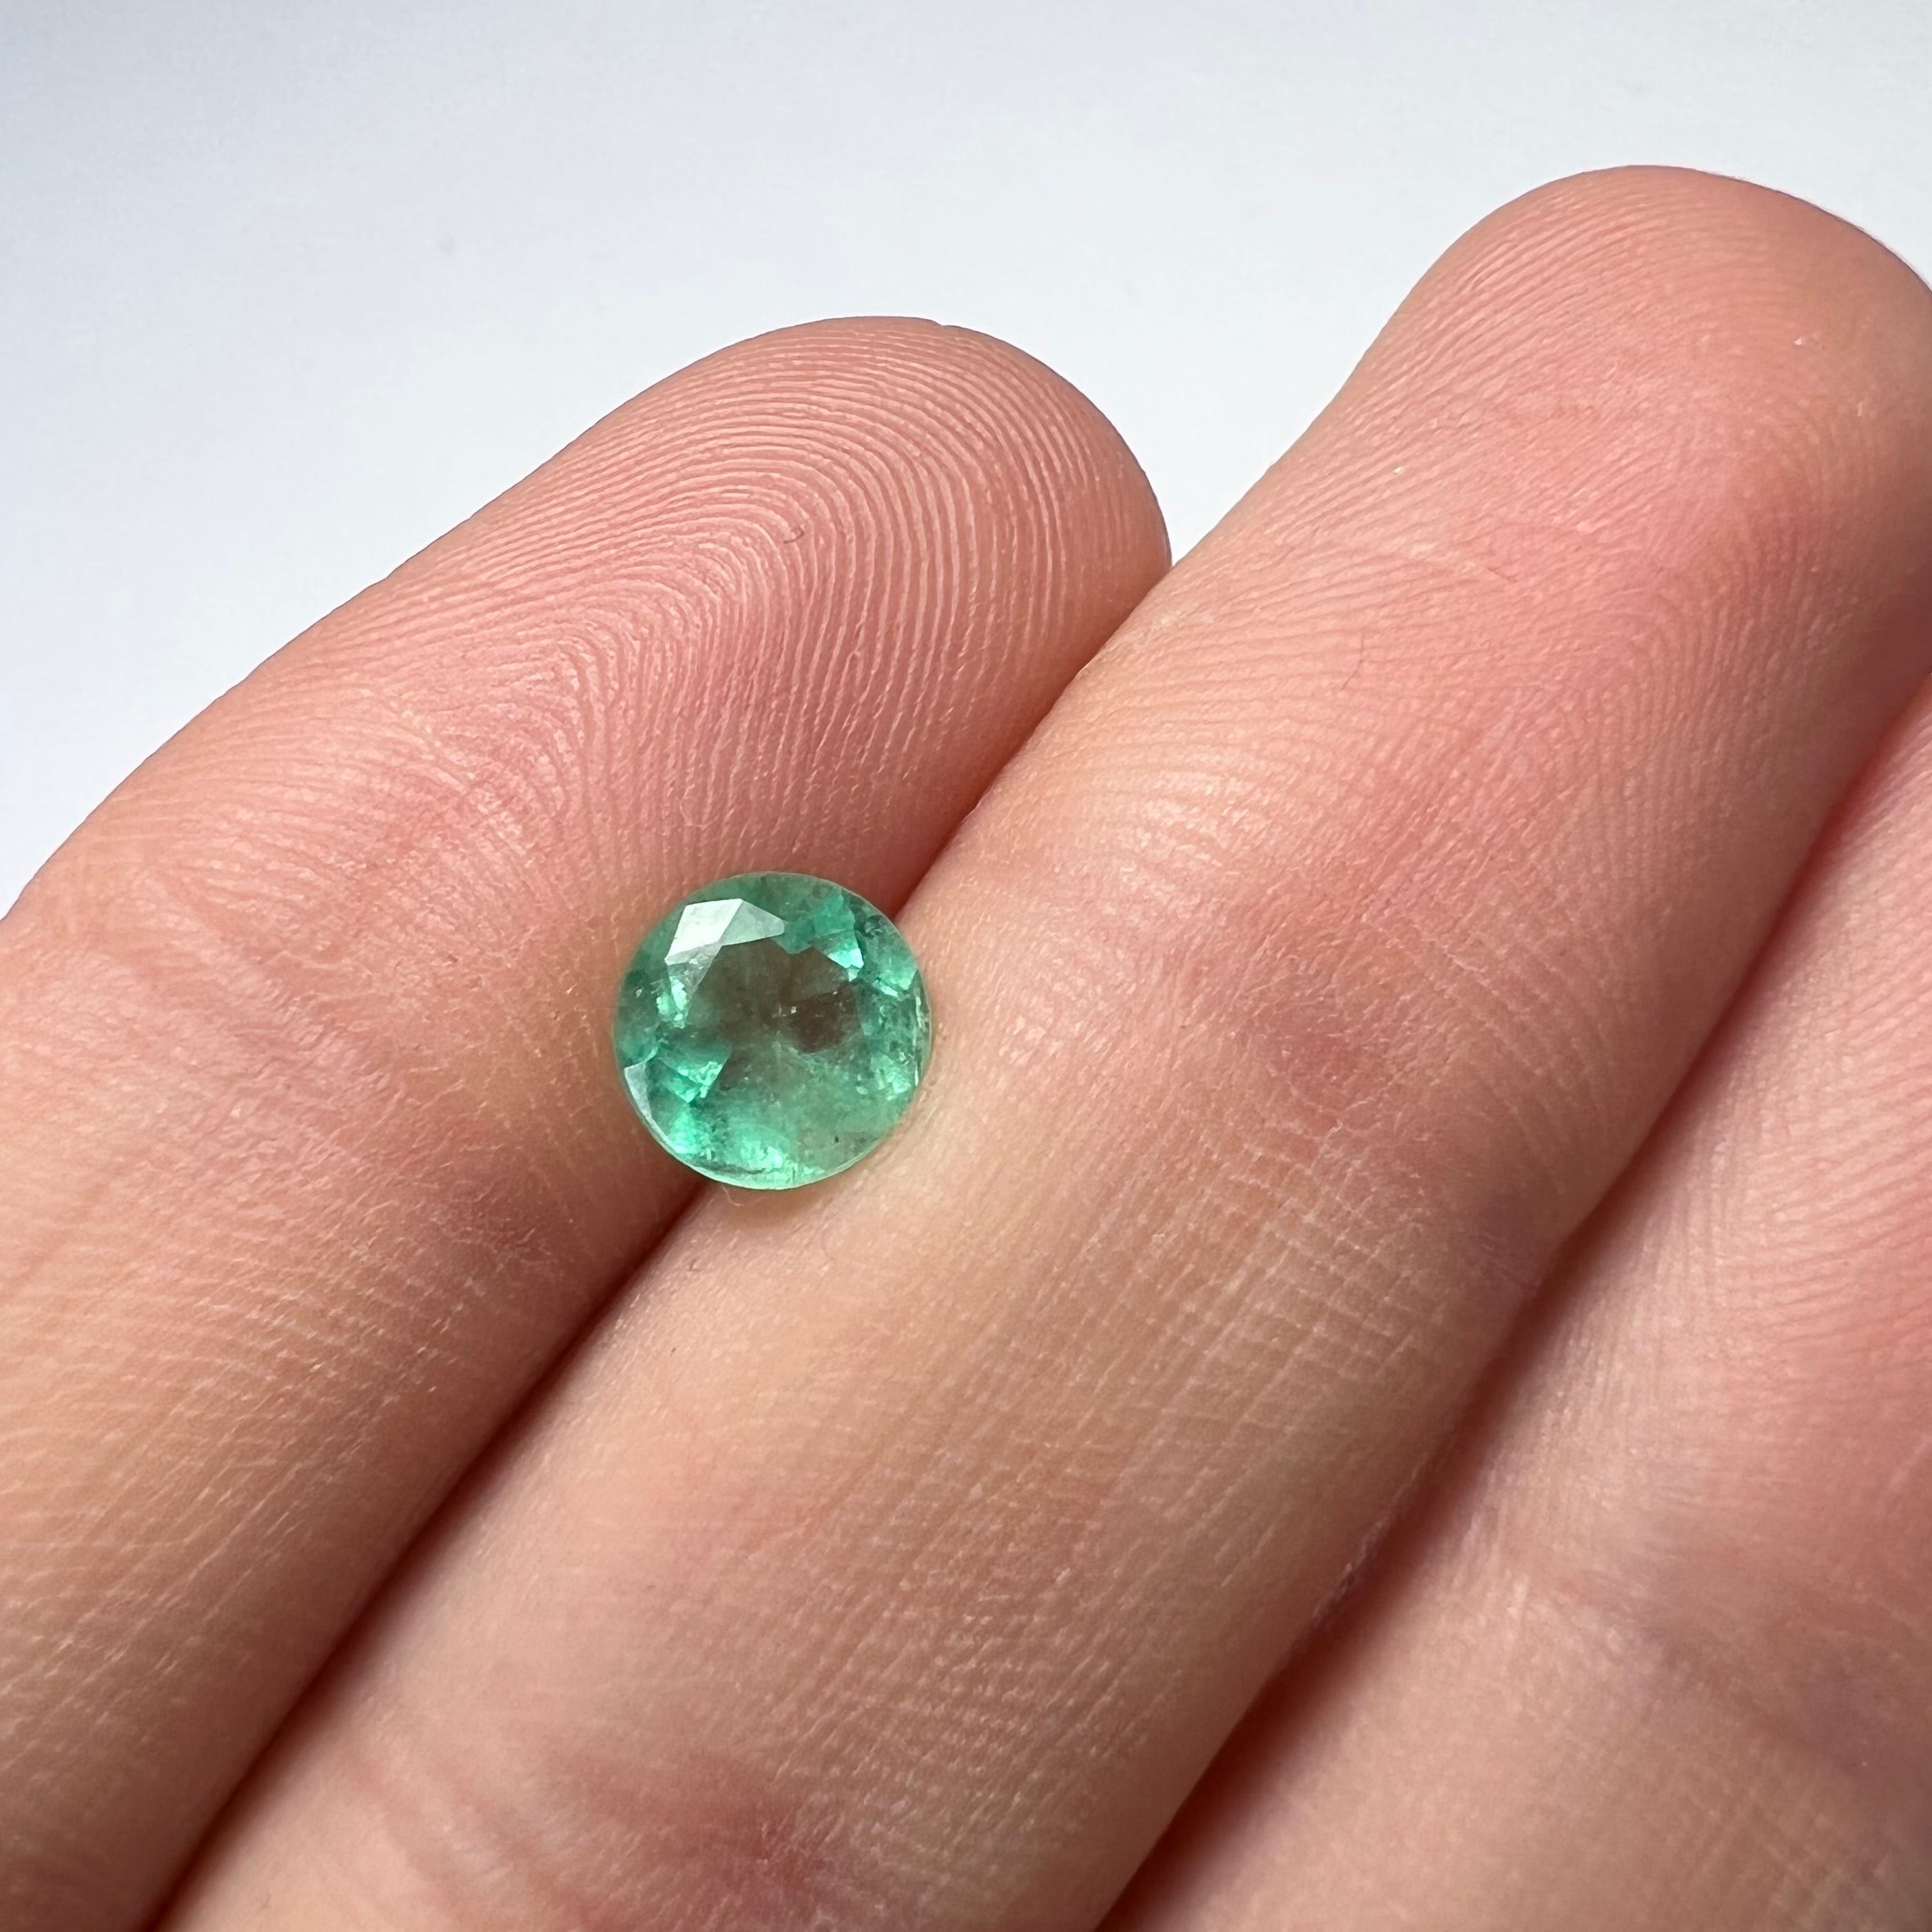 1CT Loose Natural Colombian Emerald Brilliant Round Cut 6.55x4.09mm